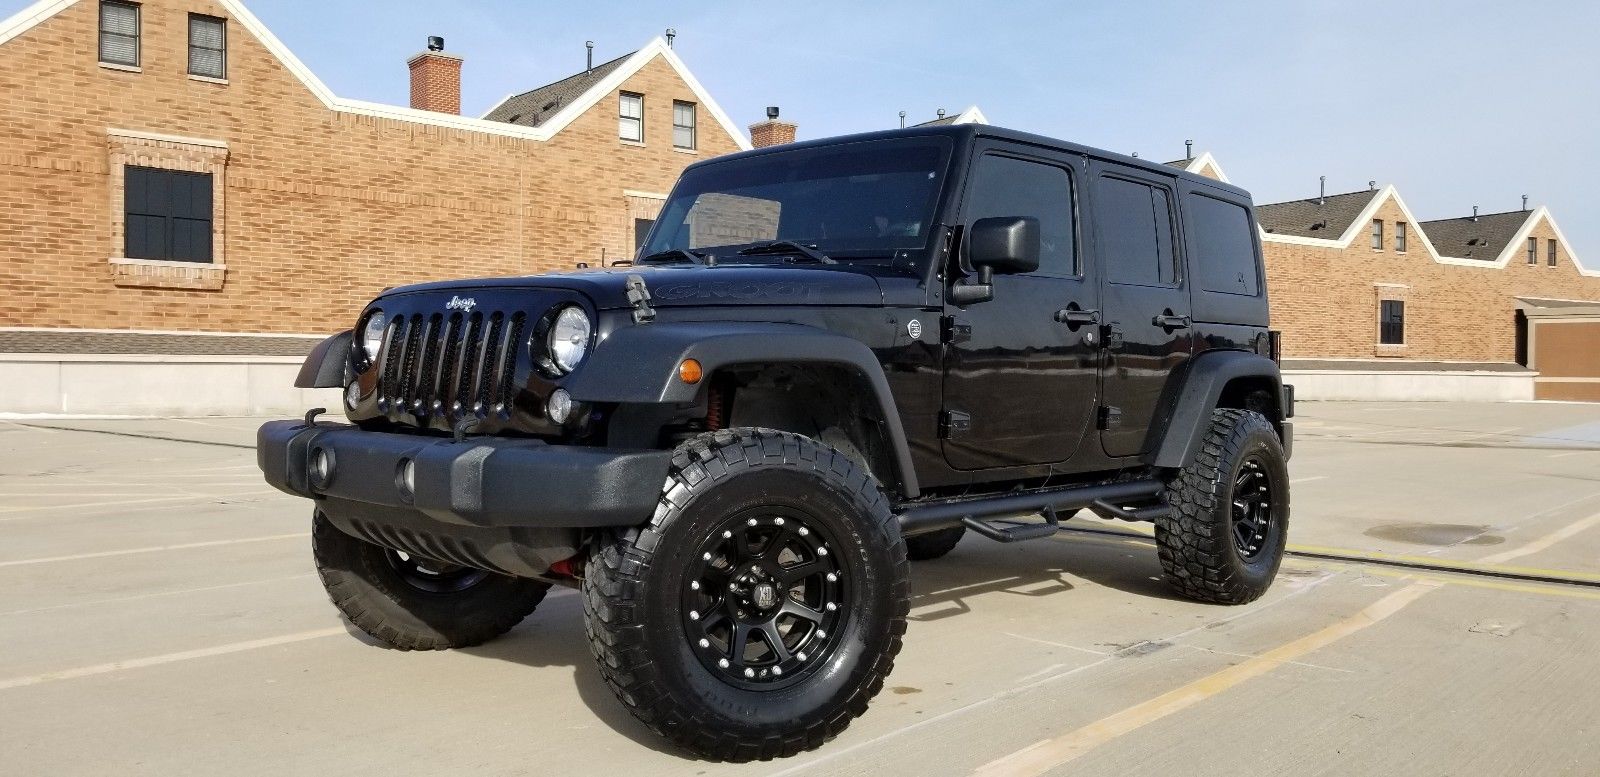 2016 jeep wrangler unlimited manual